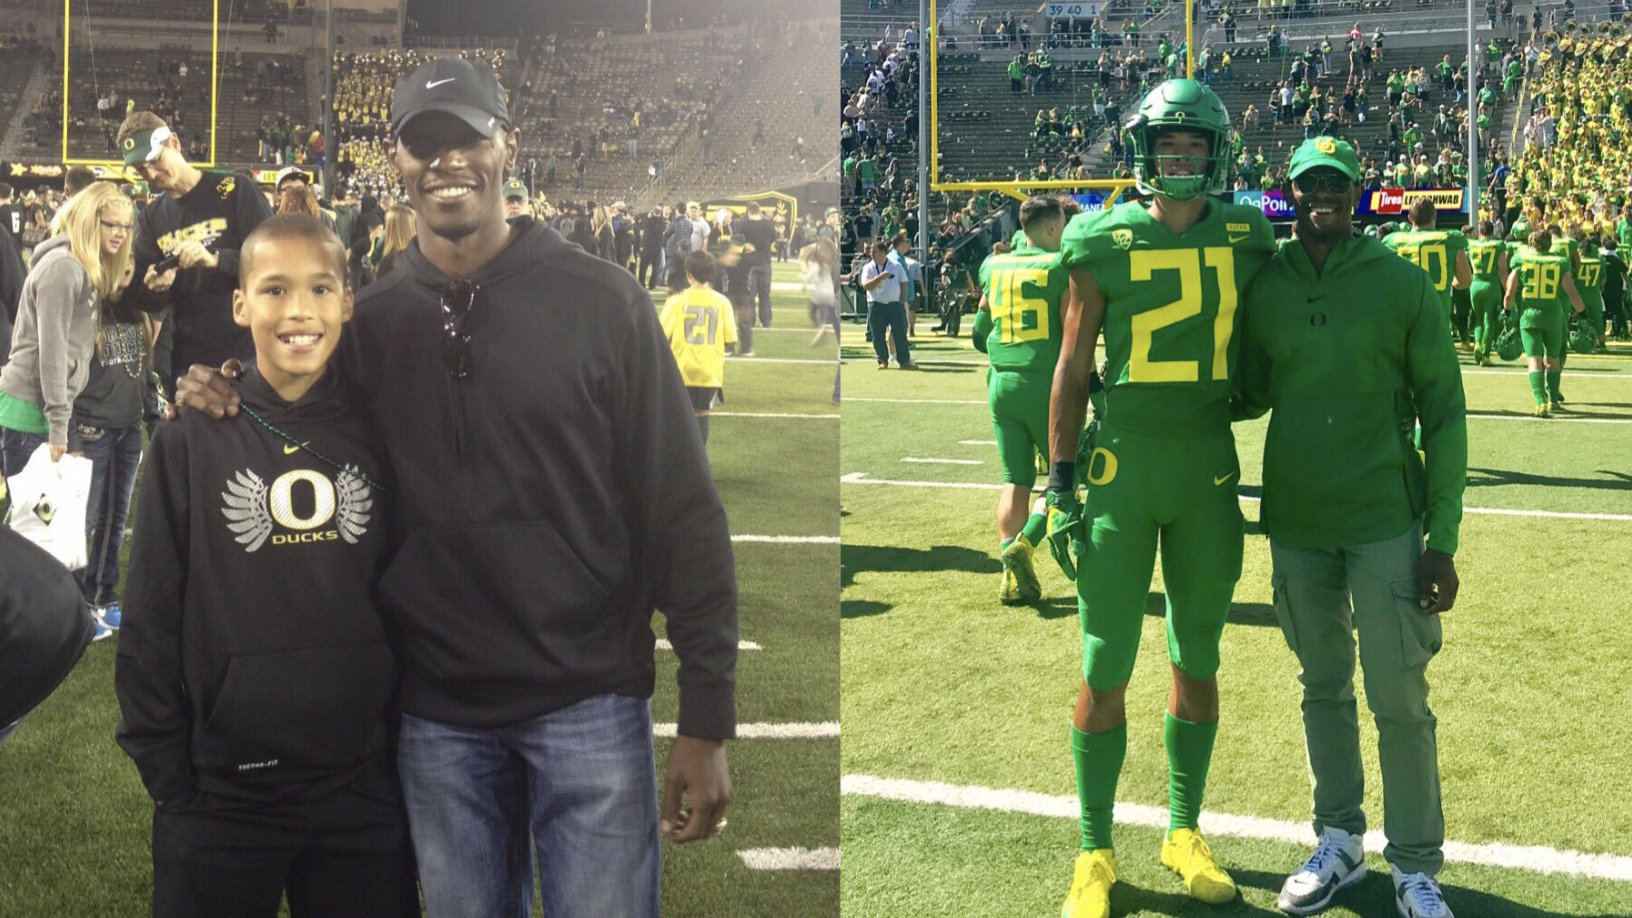 Dad's Before-and-After Photo of His College Football-Playing Son Goes Viral